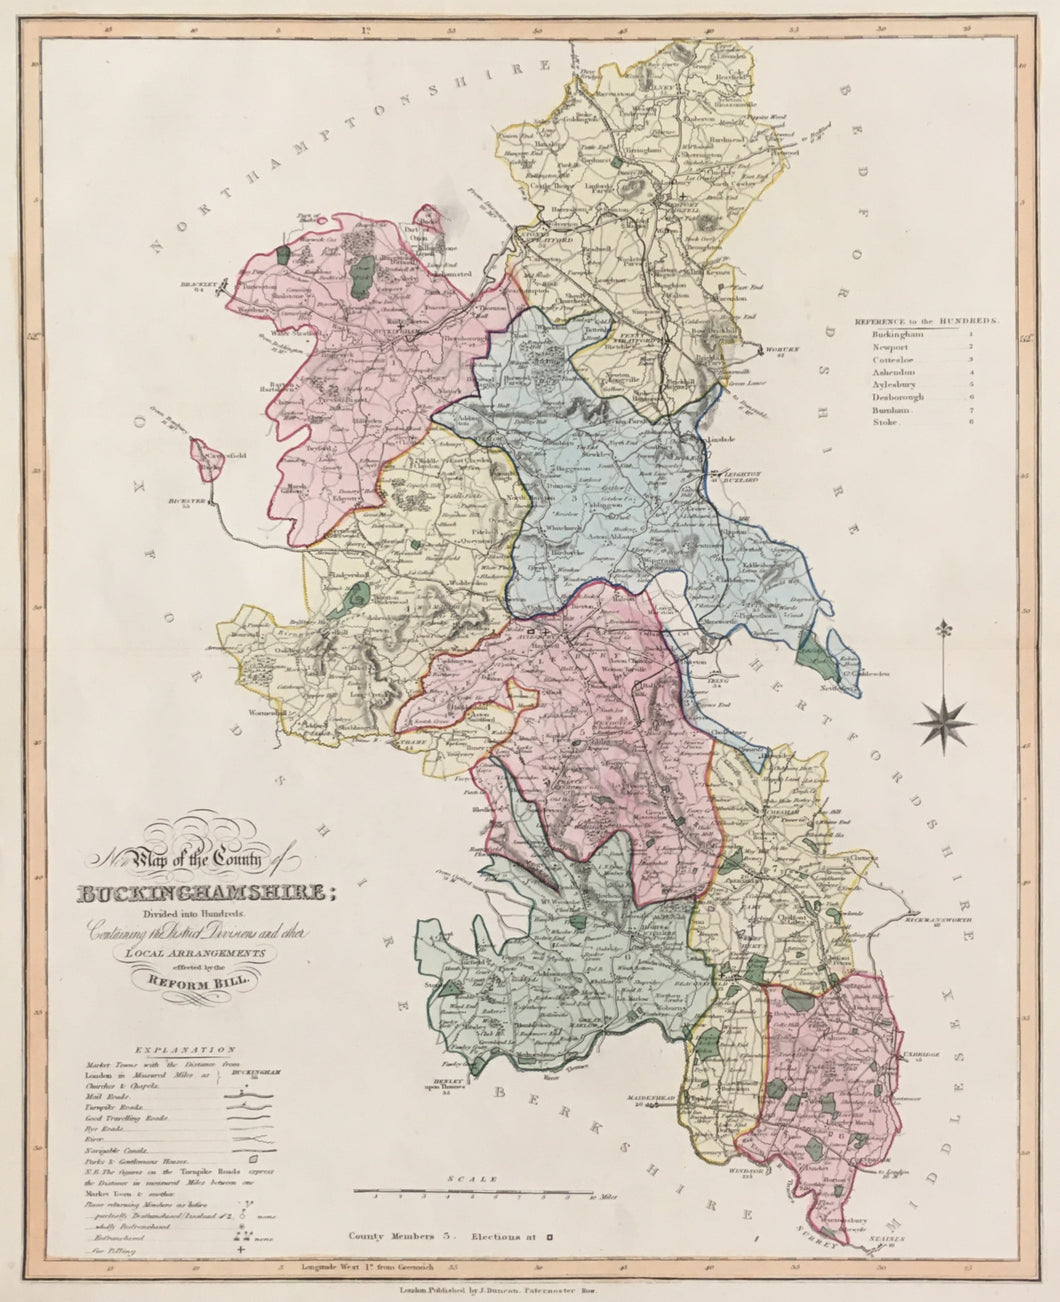 Ebden, William “New Map of the County of Buckinghamshire.”